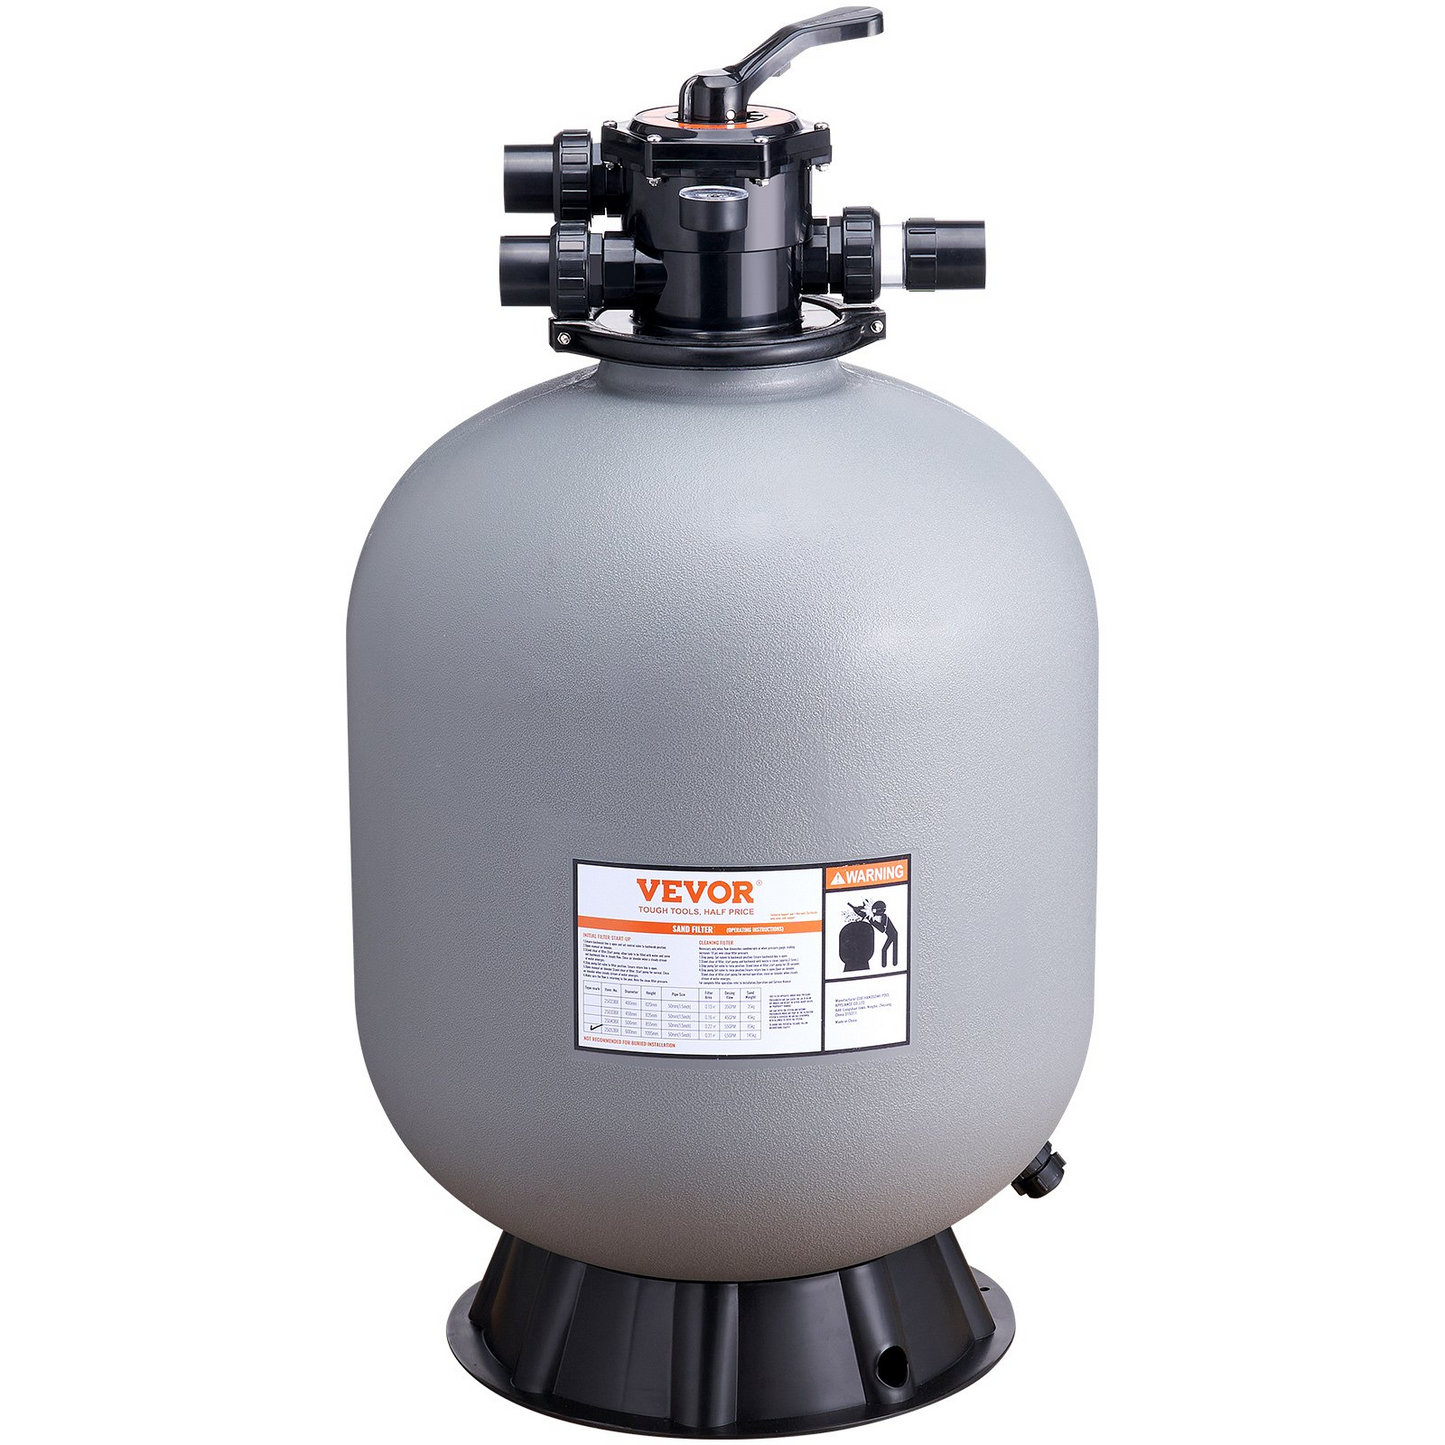 VEVOR Sand Filter, 24-inch, Up to 65 GPM Flow Rate, Above Inground Swimming Pool Sand Filter System with 7-Way Multi-Port Valve, Filter, Backwash, Rinse, Recirculate, Waste, Winter, Closed Functions, Goodies N Stuff